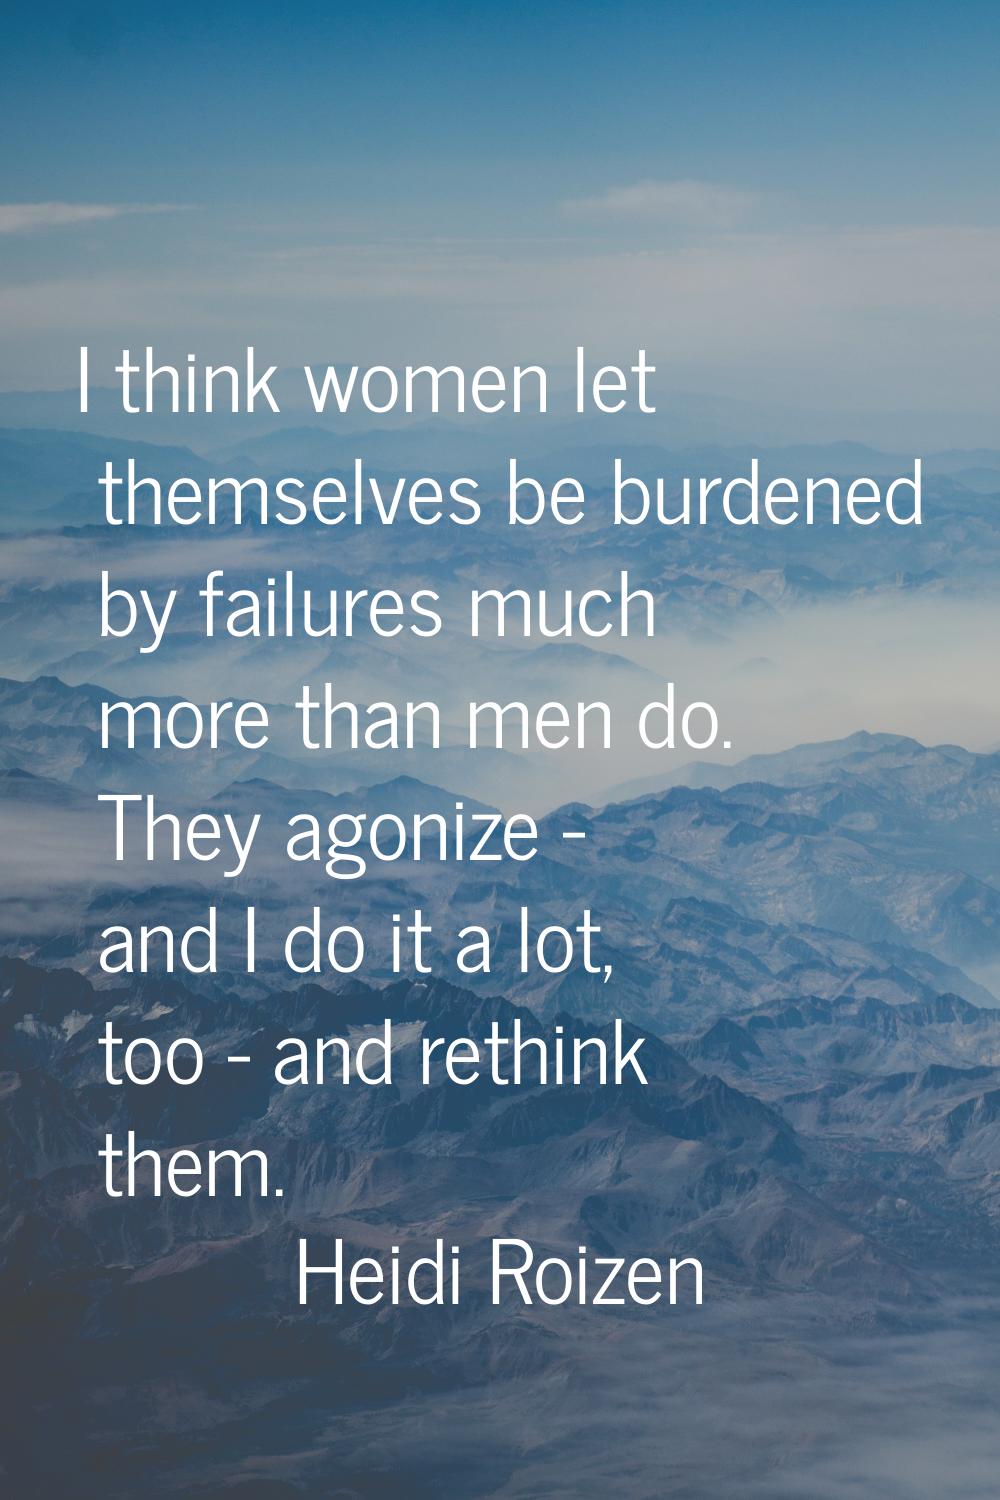 I think women let themselves be burdened by failures much more than men do. They agonize - and I do